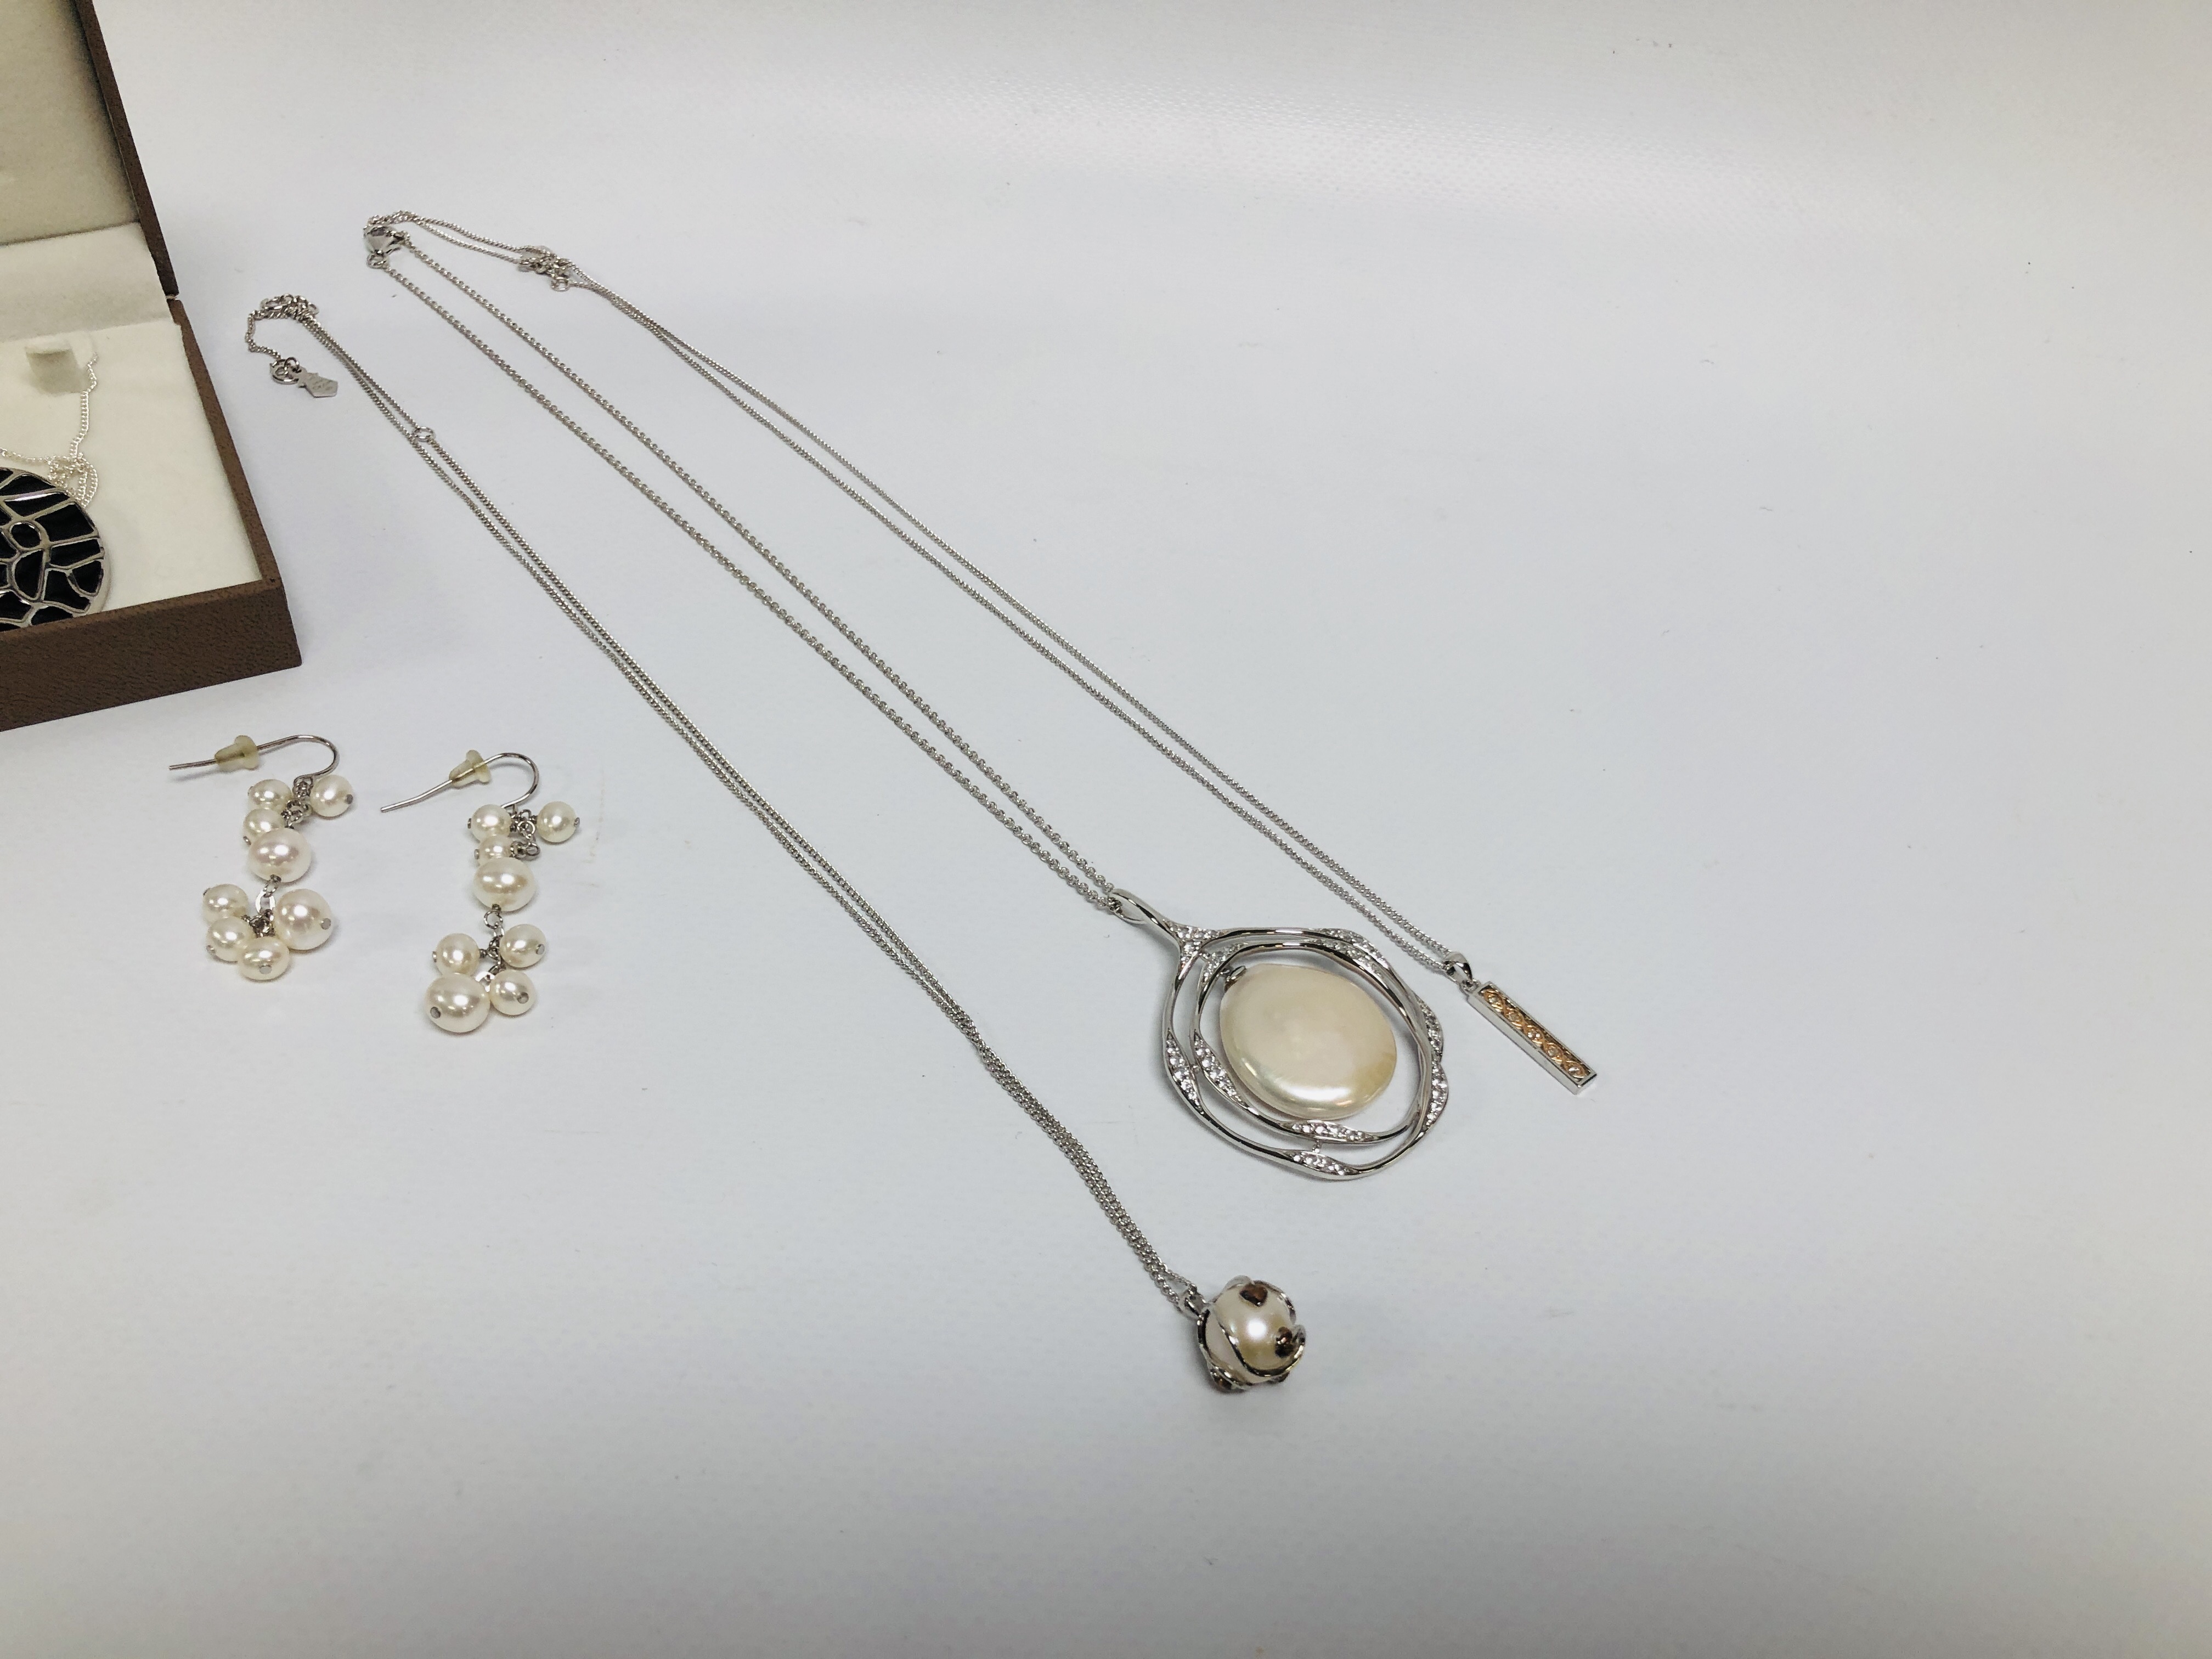 4 X SILVER DESIGNER PENDANT NECKLACES TWO OF WHICH ARE MARKED "CLOGAU" + PAIR OF MULTI PEARL DROP - Image 6 of 7